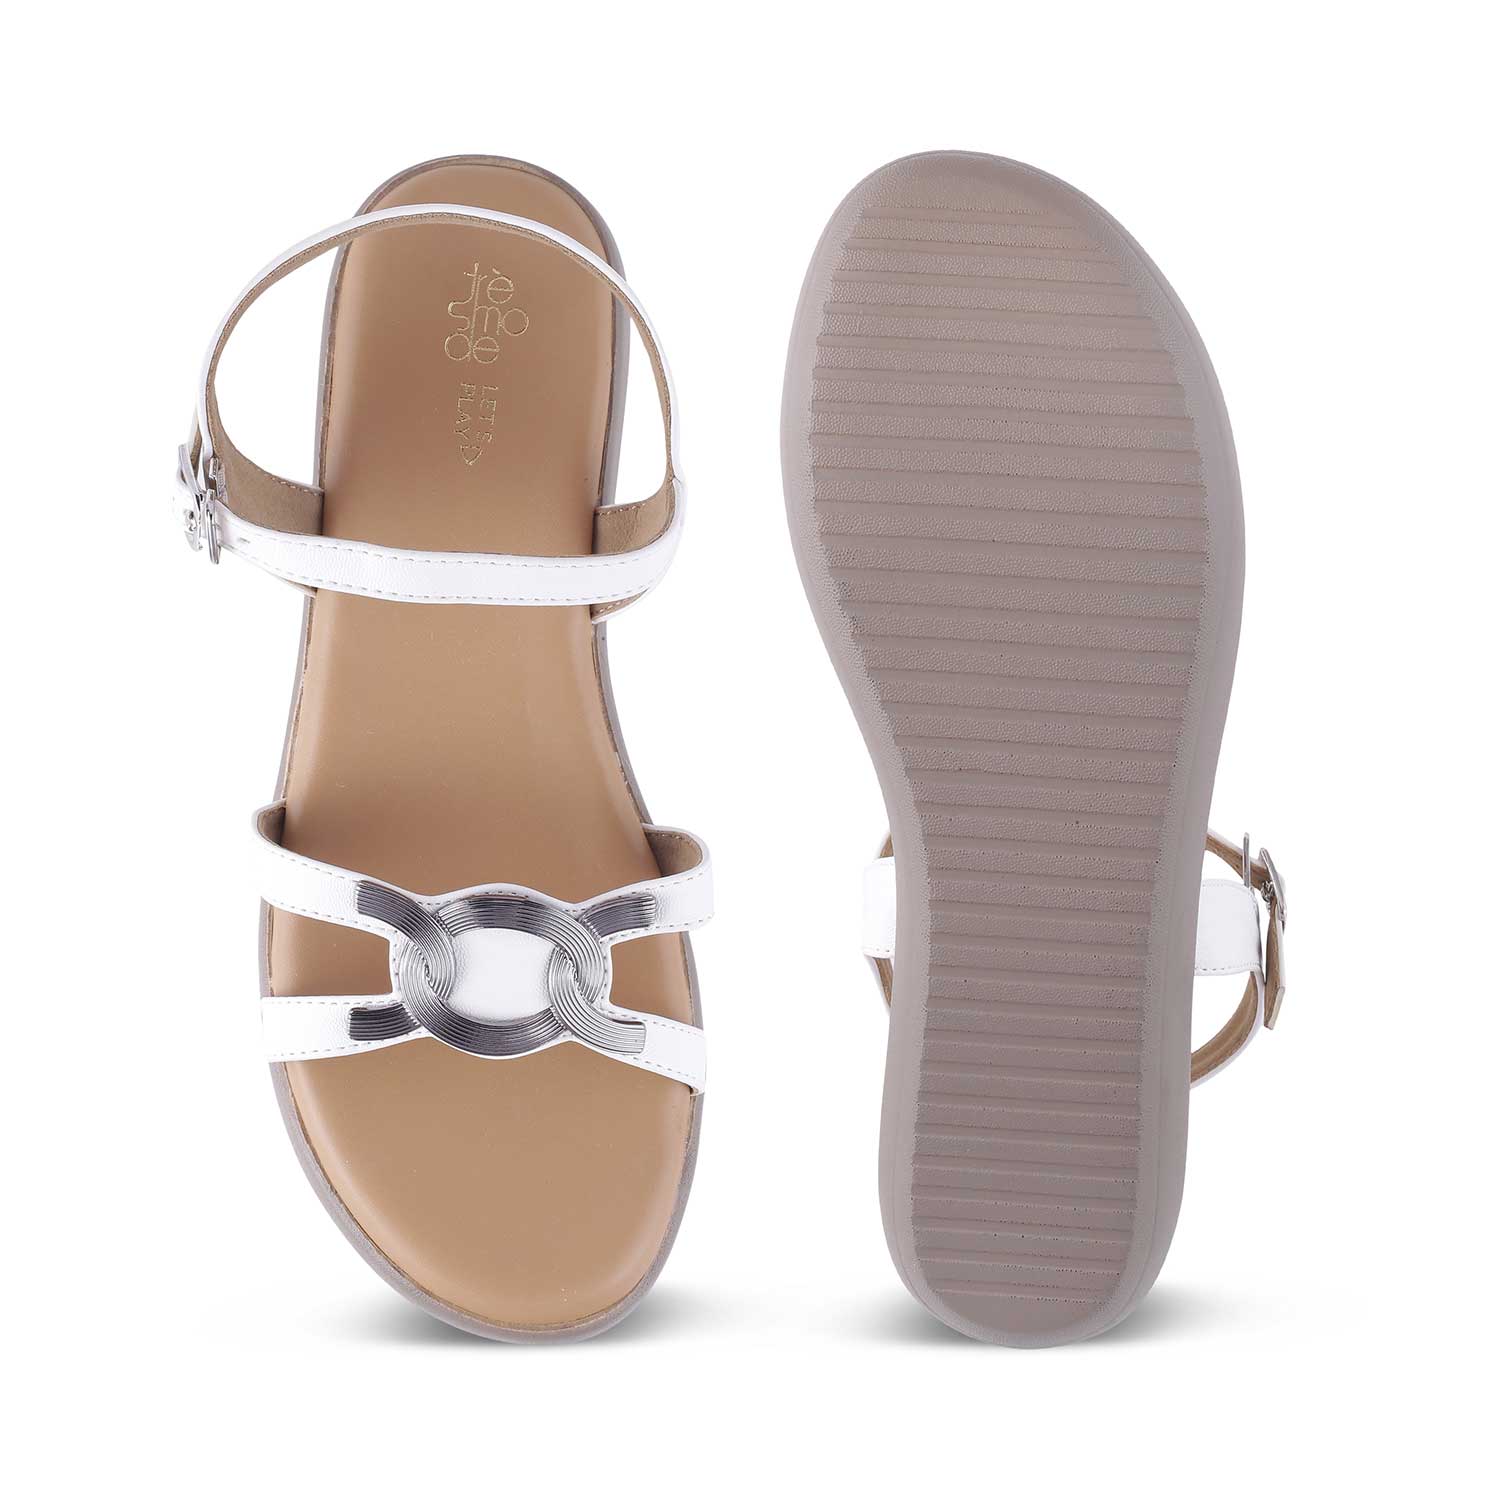 The Sud White Women's Dress Wedge Sandals Tresmode